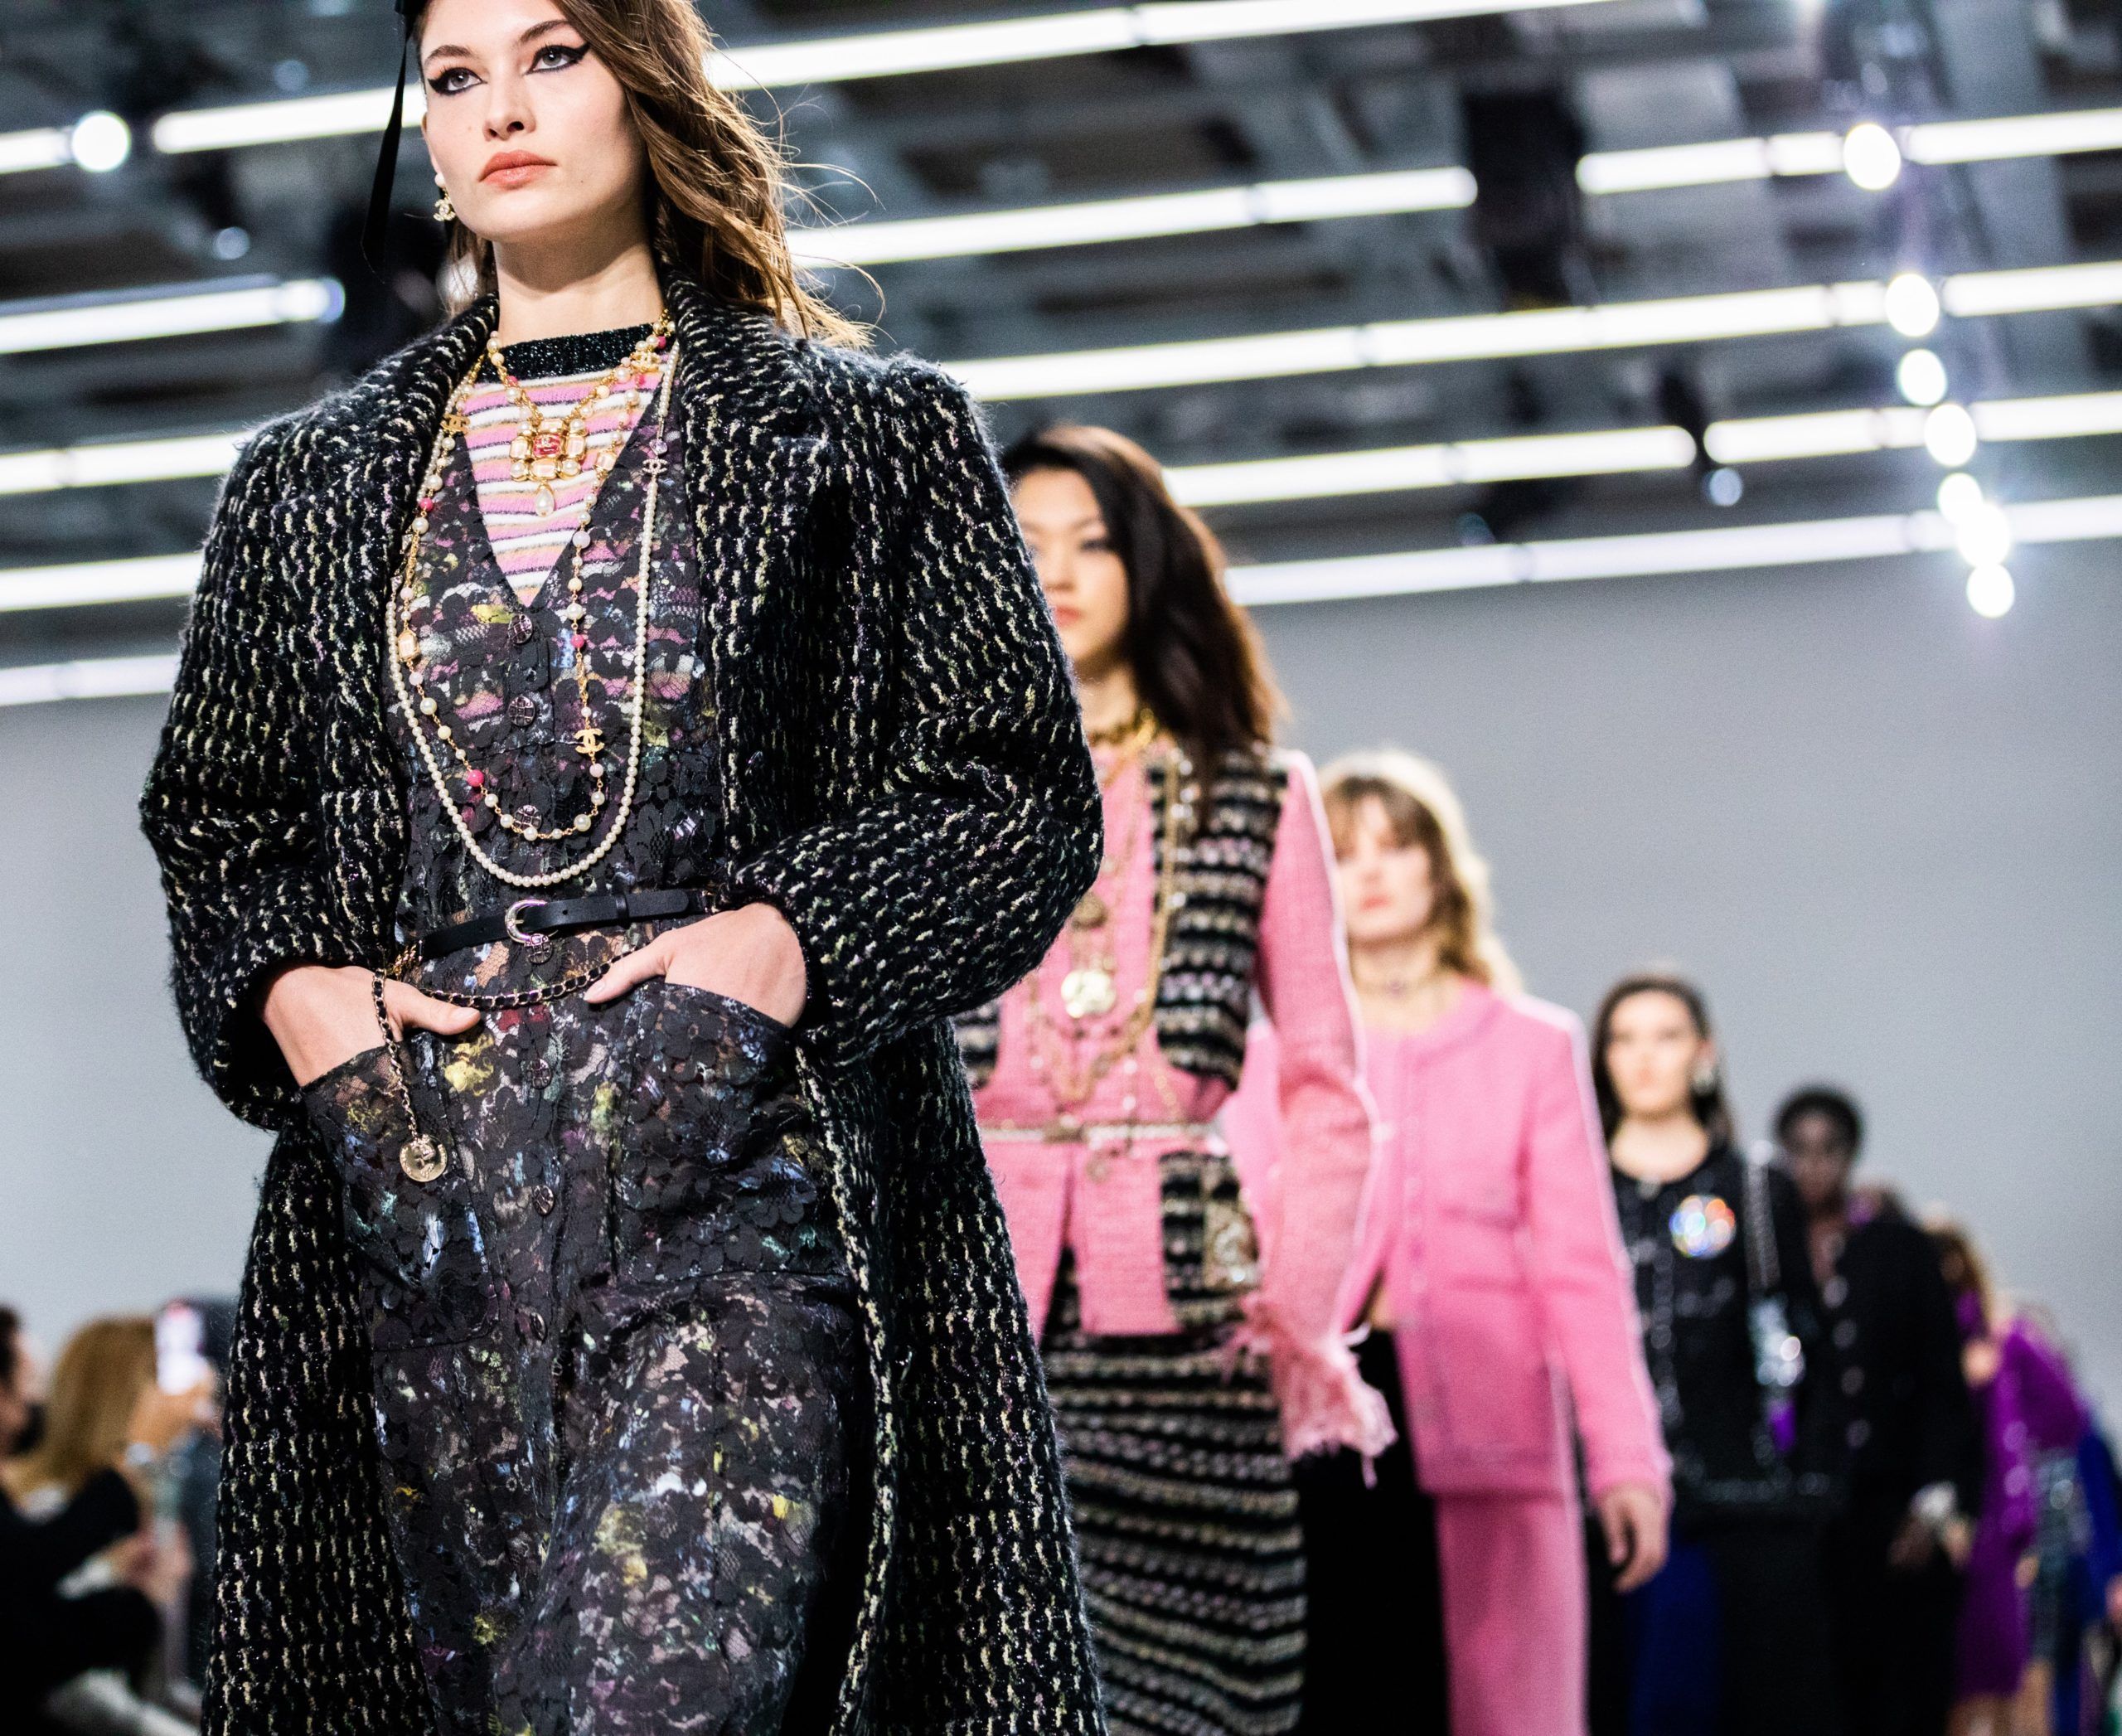 Here's a sneak-peek into Chanel's Métiers d'art collection 2021/22